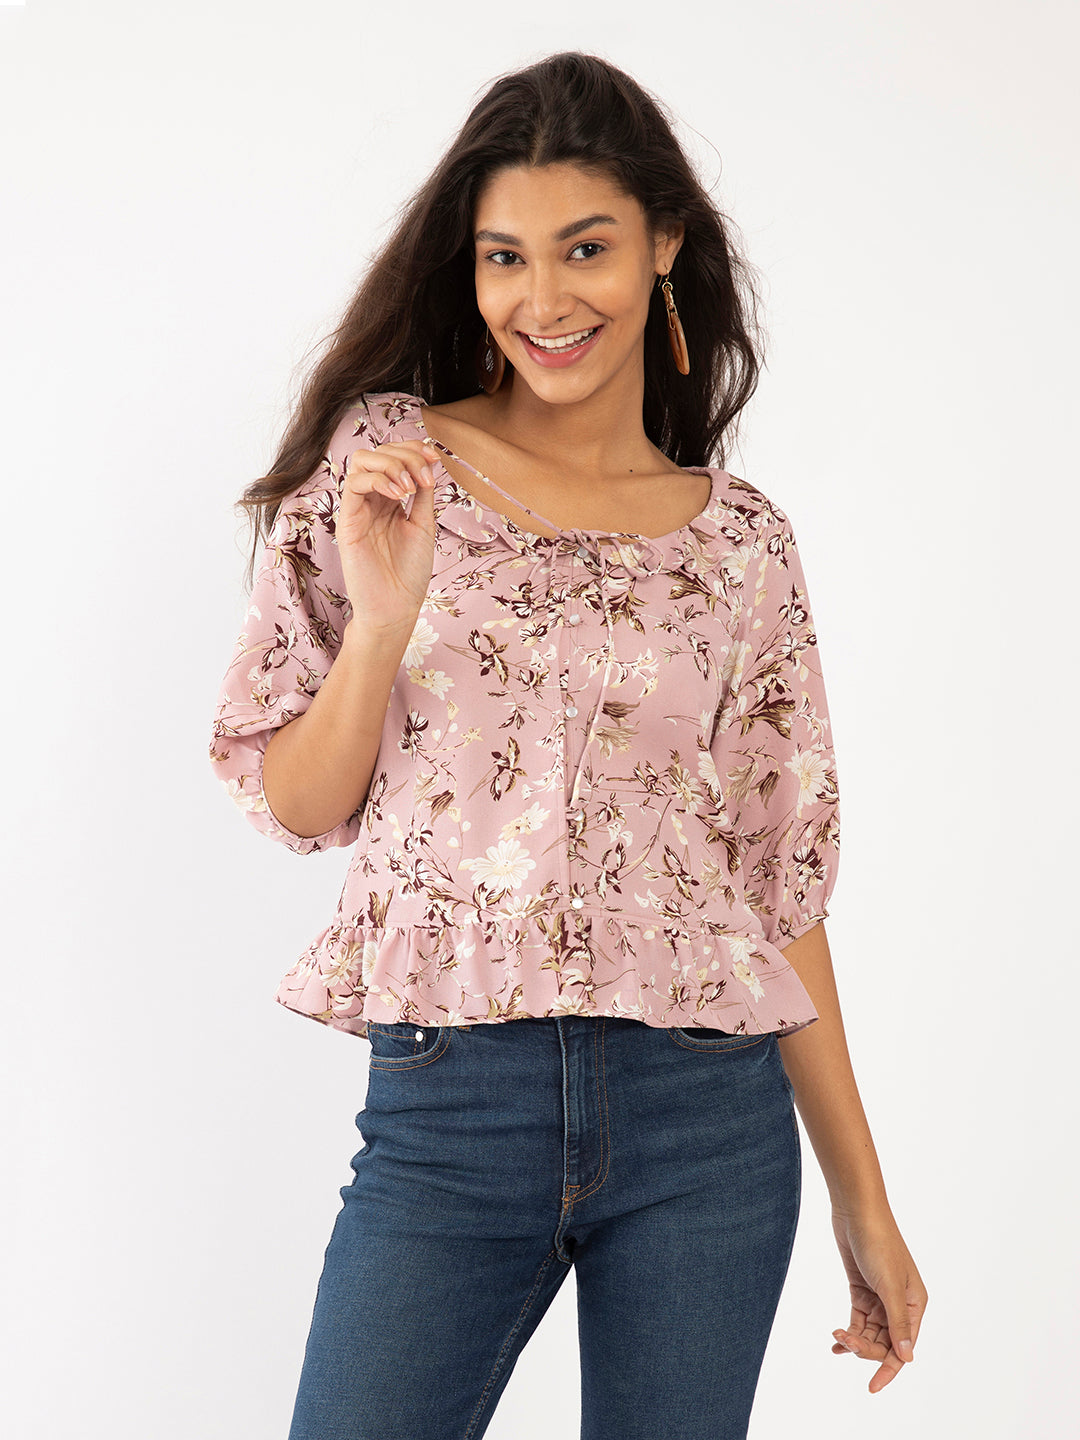 Pink Floral Print Ruffled Top For Women